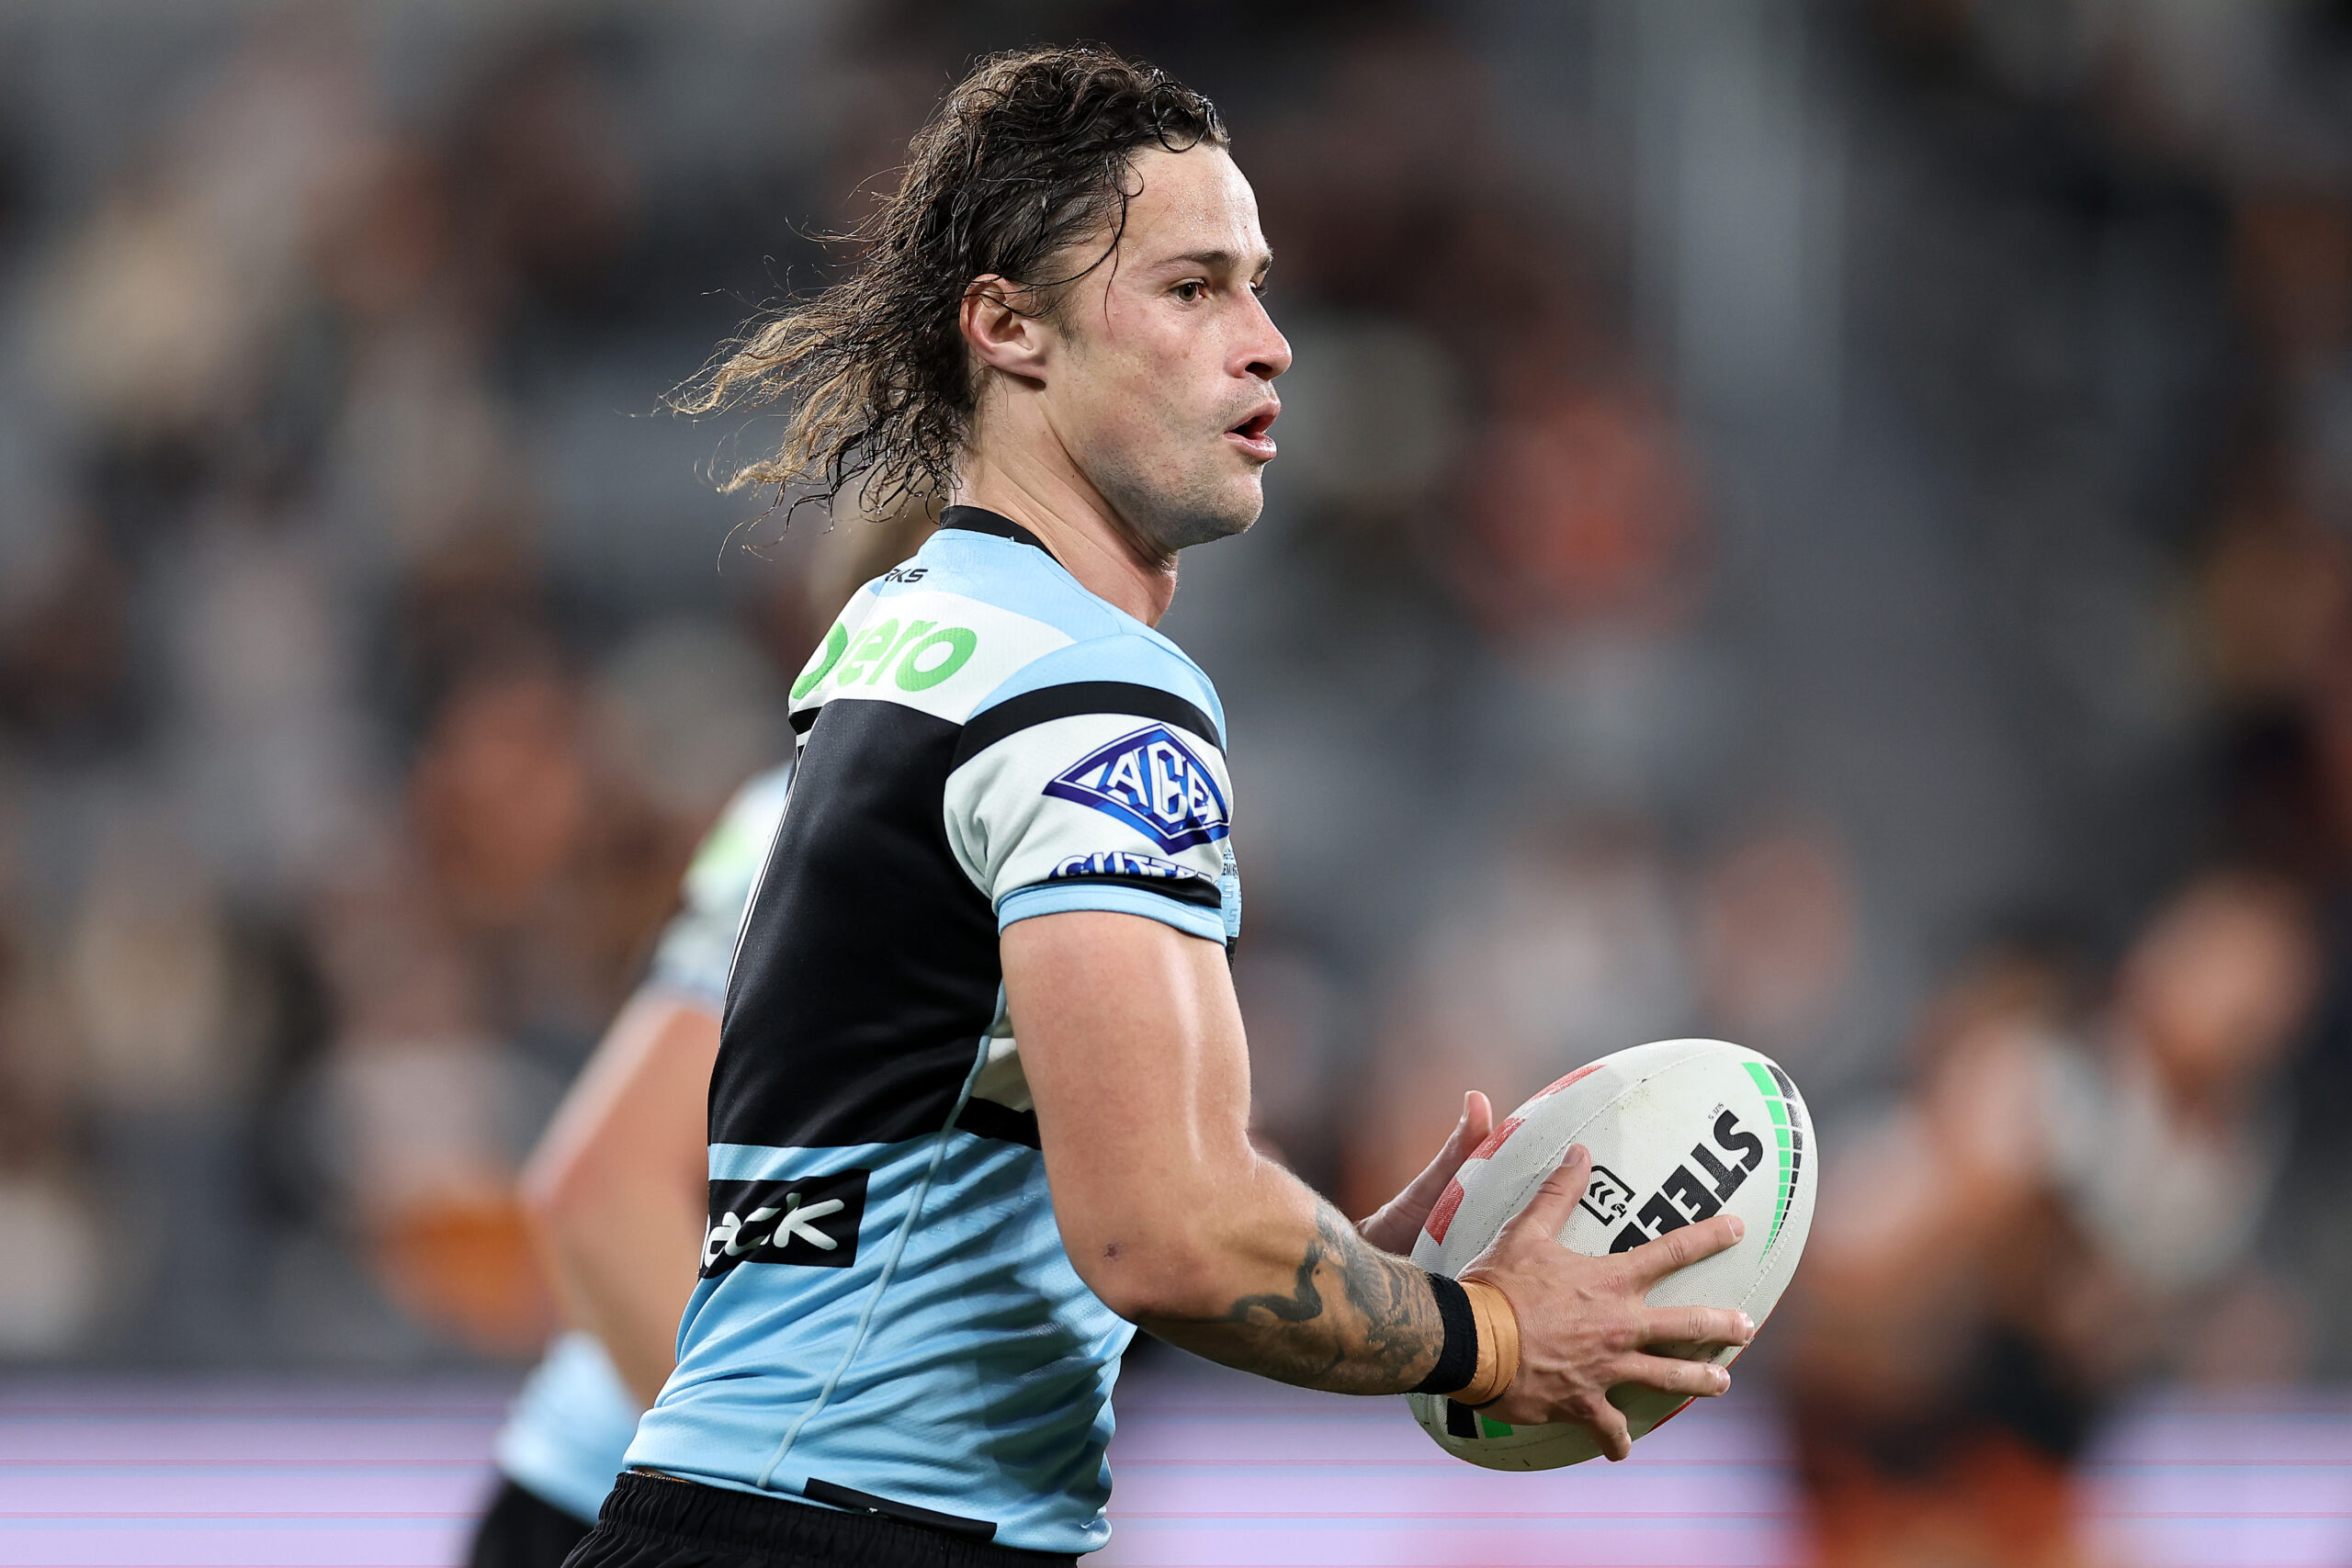 Cronulla Sharks vs Sydney Roosters live stream guide How to watch NRL elimination final on TV or online, start time, team lists - NRL News